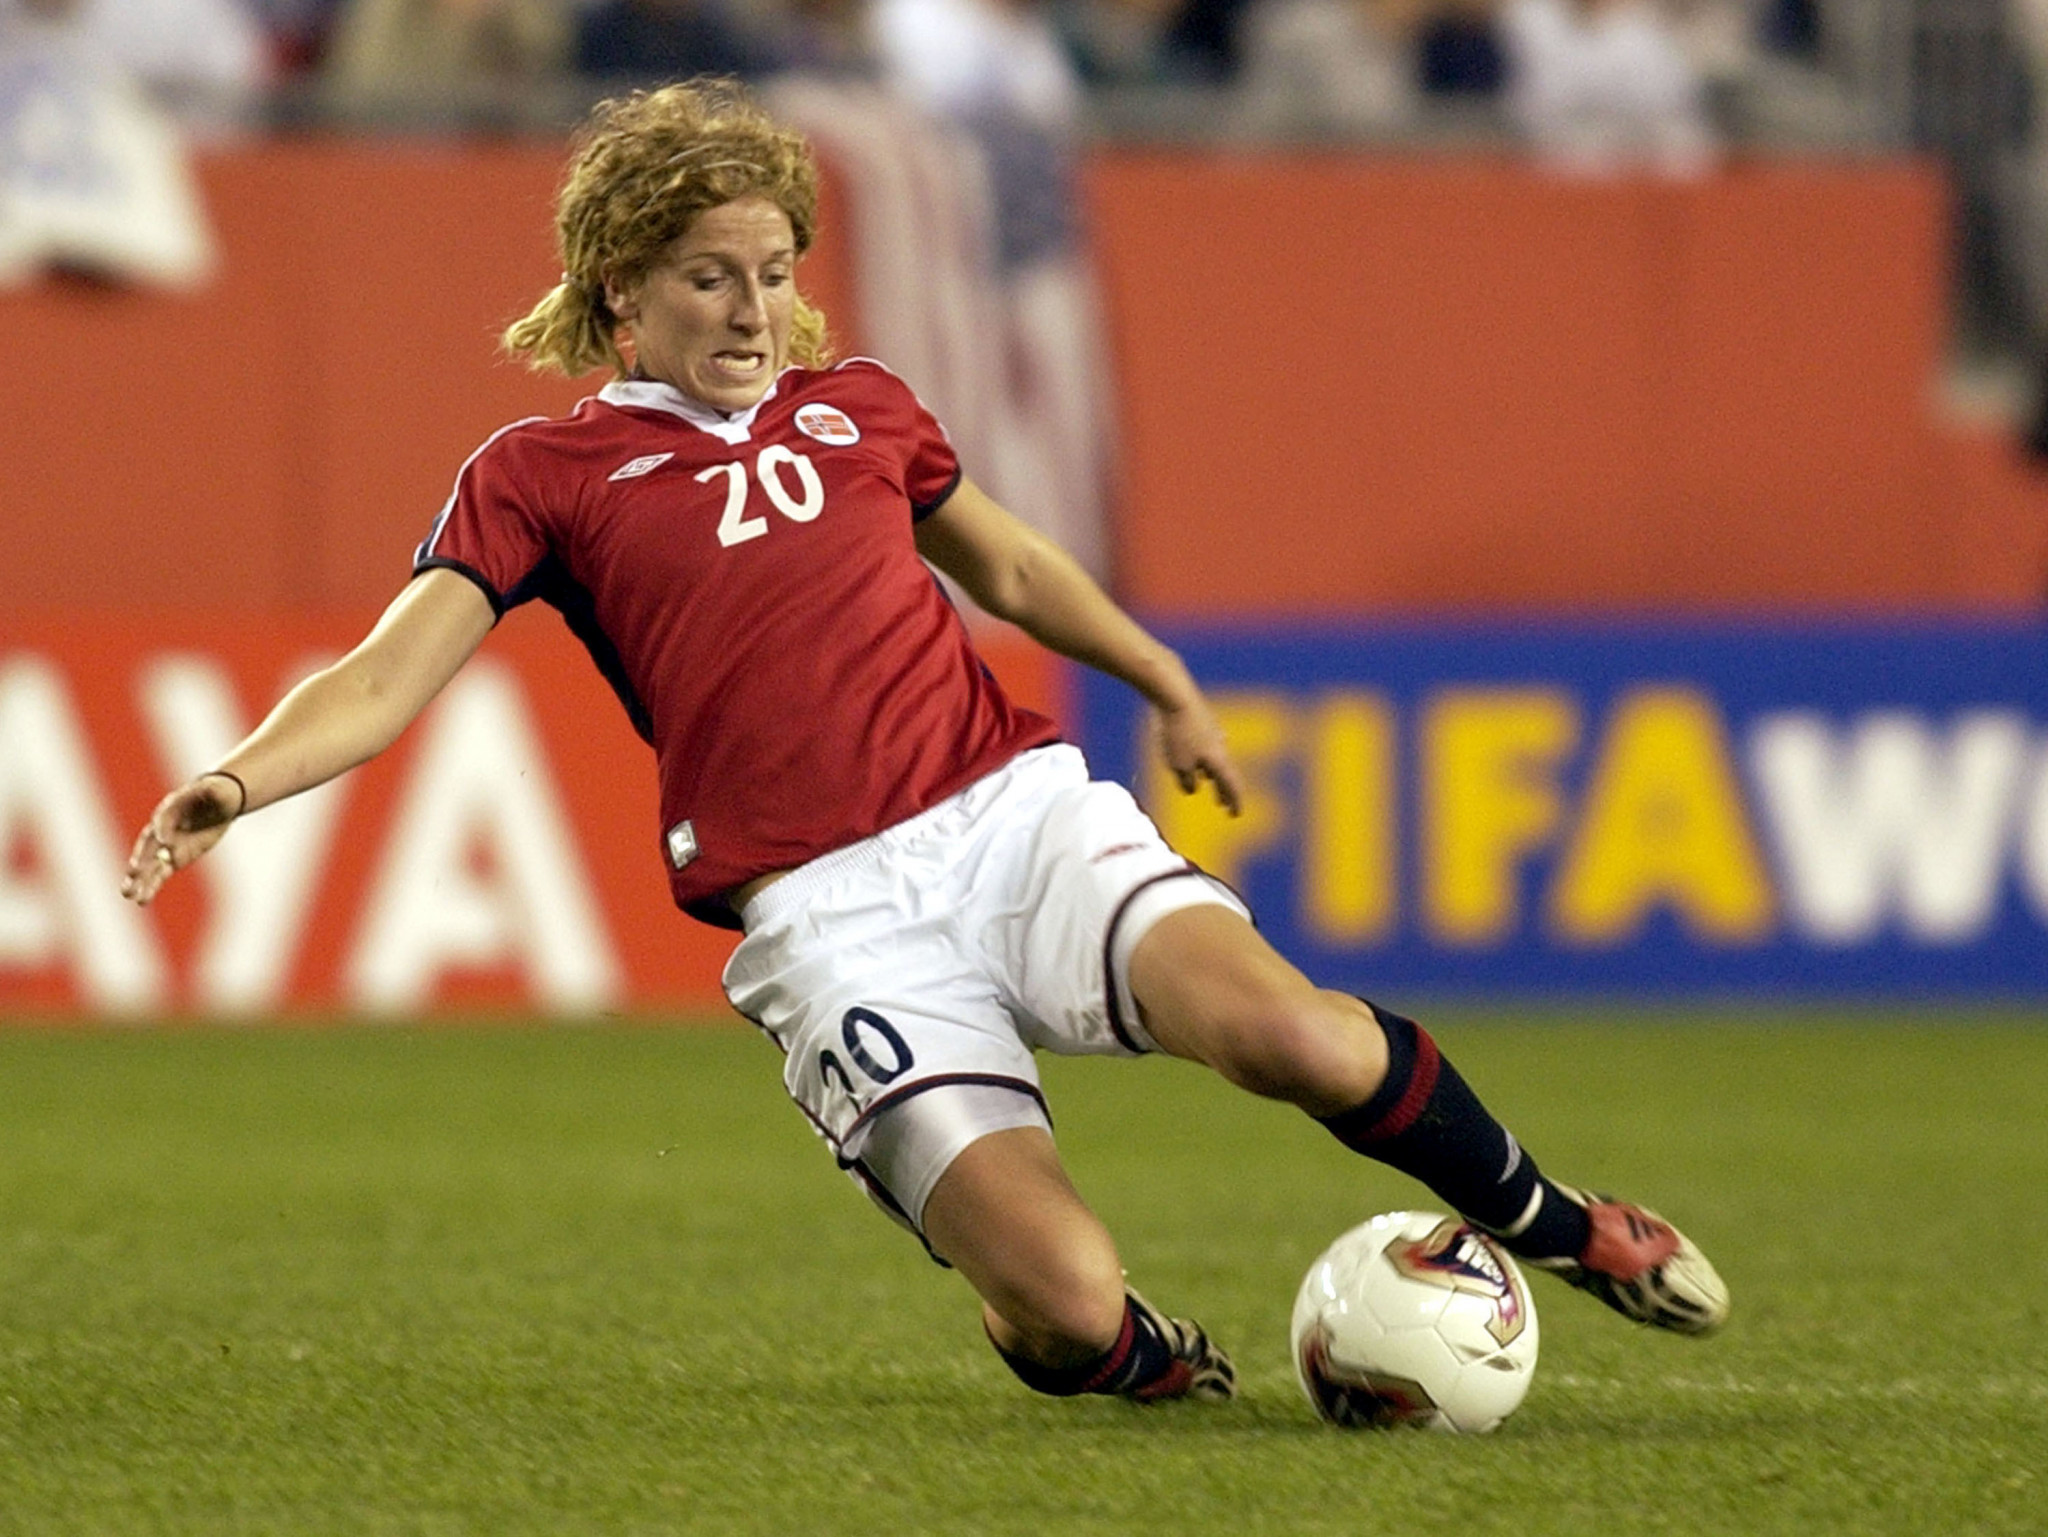 Lise Klaveness, who played for Norway during the 2003 Women's World Cup, said there had to be an analysis and independent investigation into the death toll at Qatar 2022 ©Getty Images 